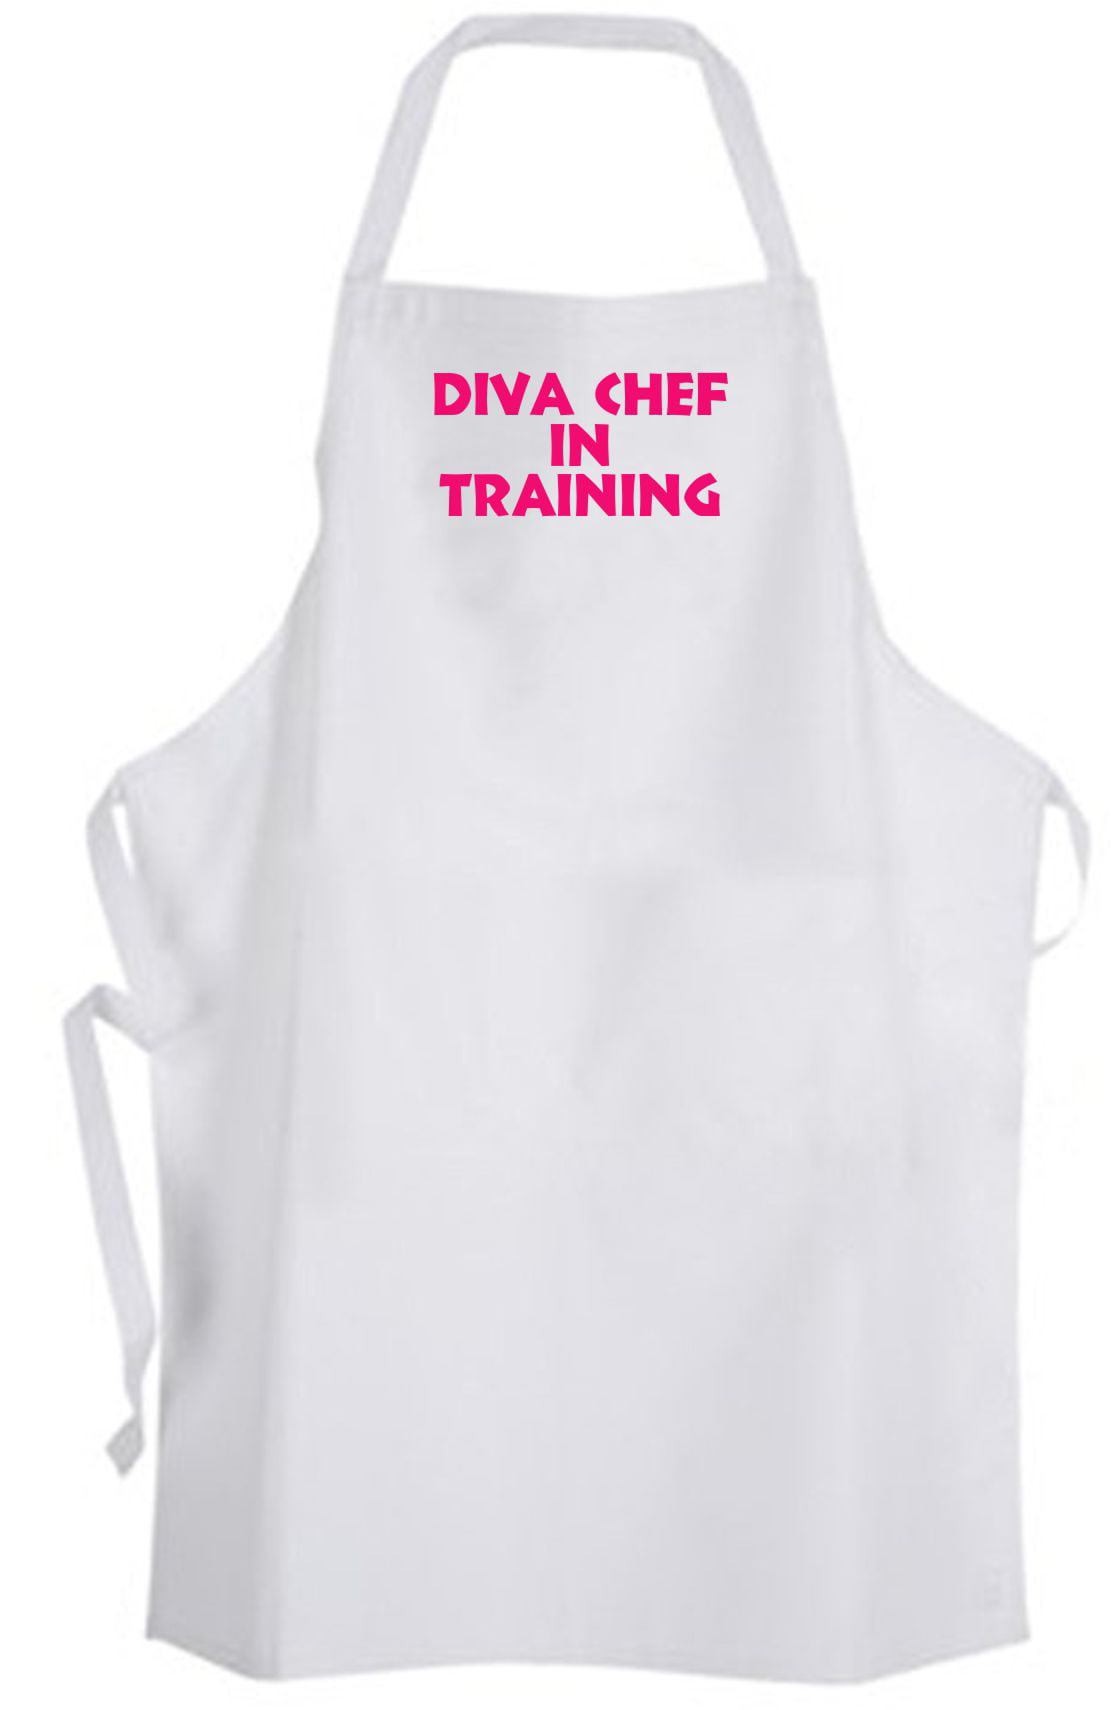 Luke X-Wing Pilot cooking apron with oven mitt from Star Wars